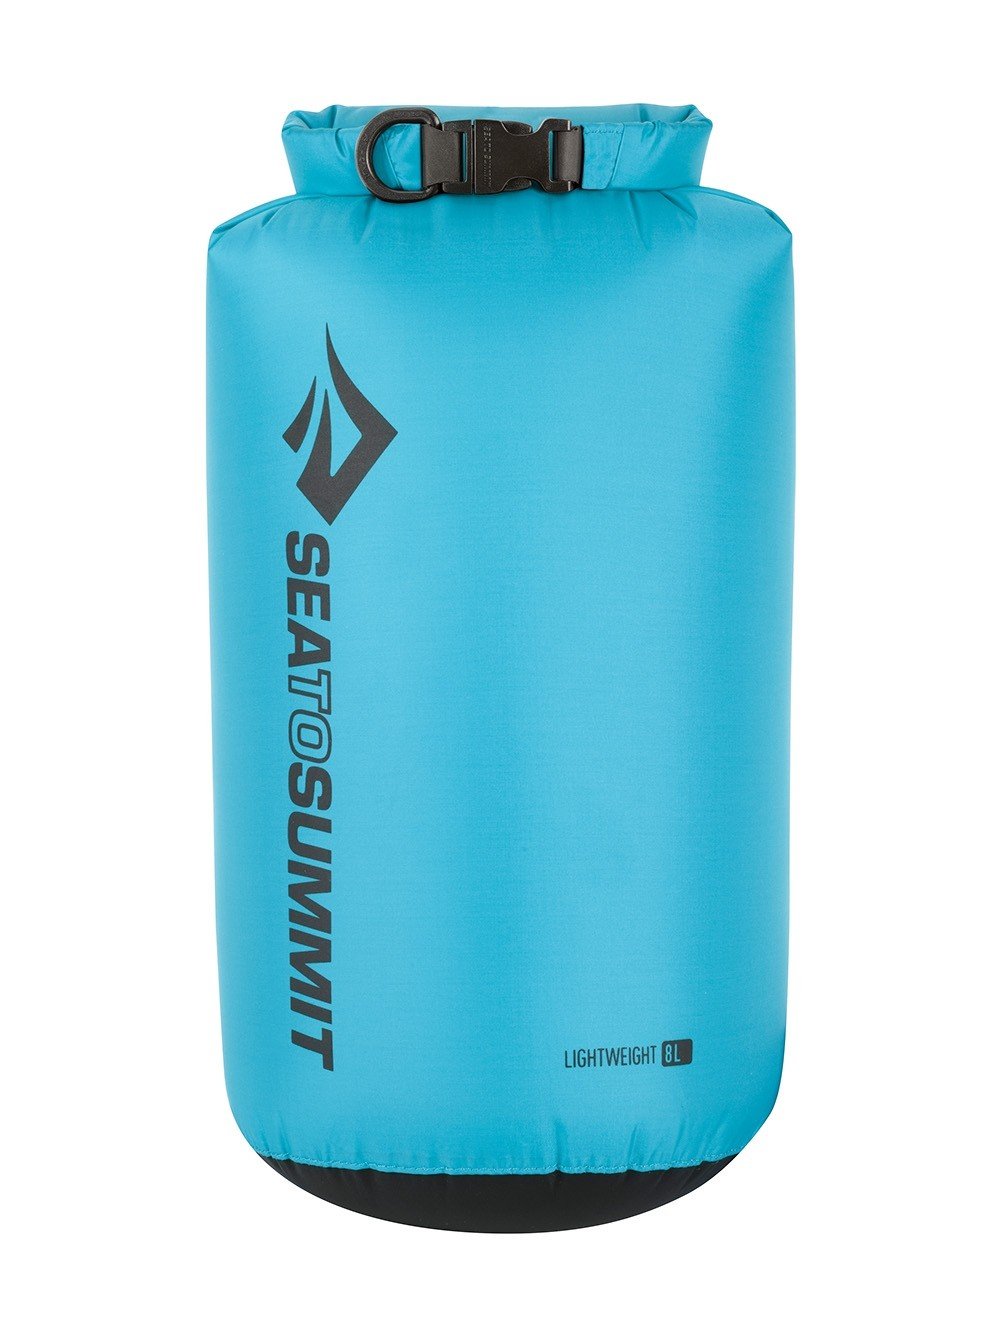 Sea To Summit Lightweight 70D 8 Litres Dry Sack Bags, Packs and Cases Sea To Summit Blue Tactical Gear Supplier Tactical Distributors Australia